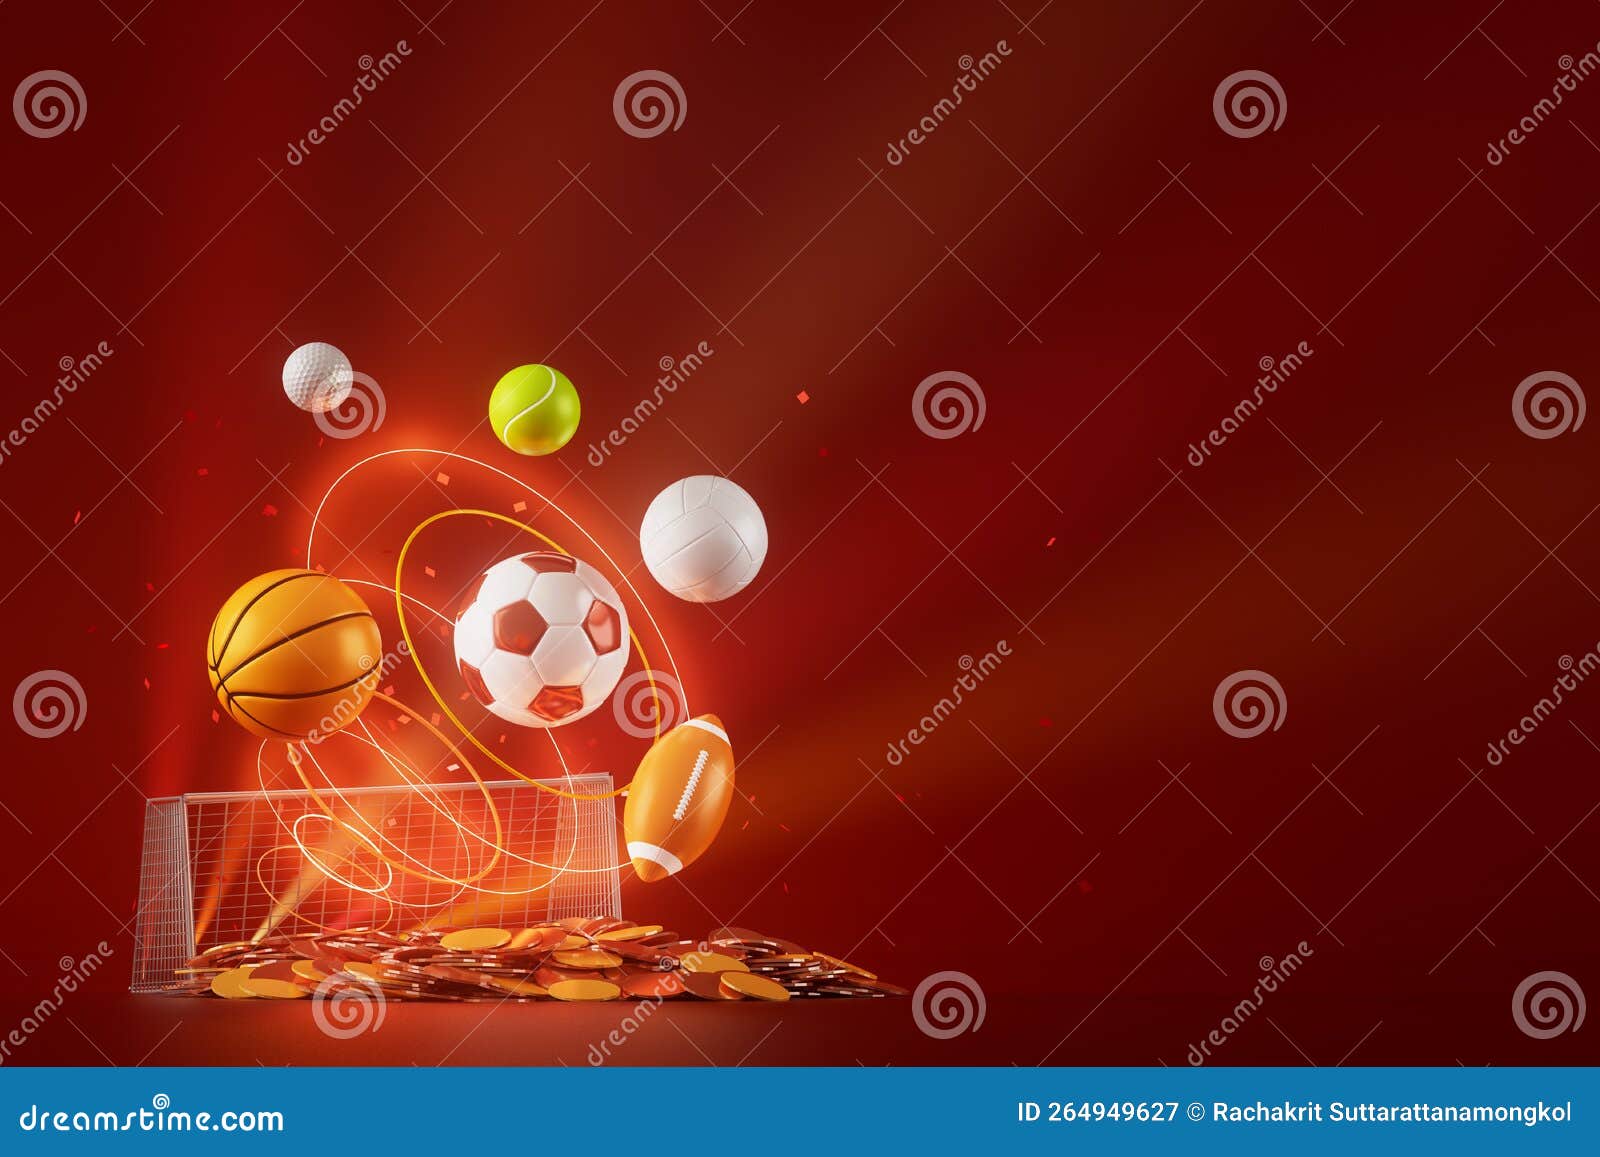 256,023 Video Game Background Images, Stock Photos, 3D objects